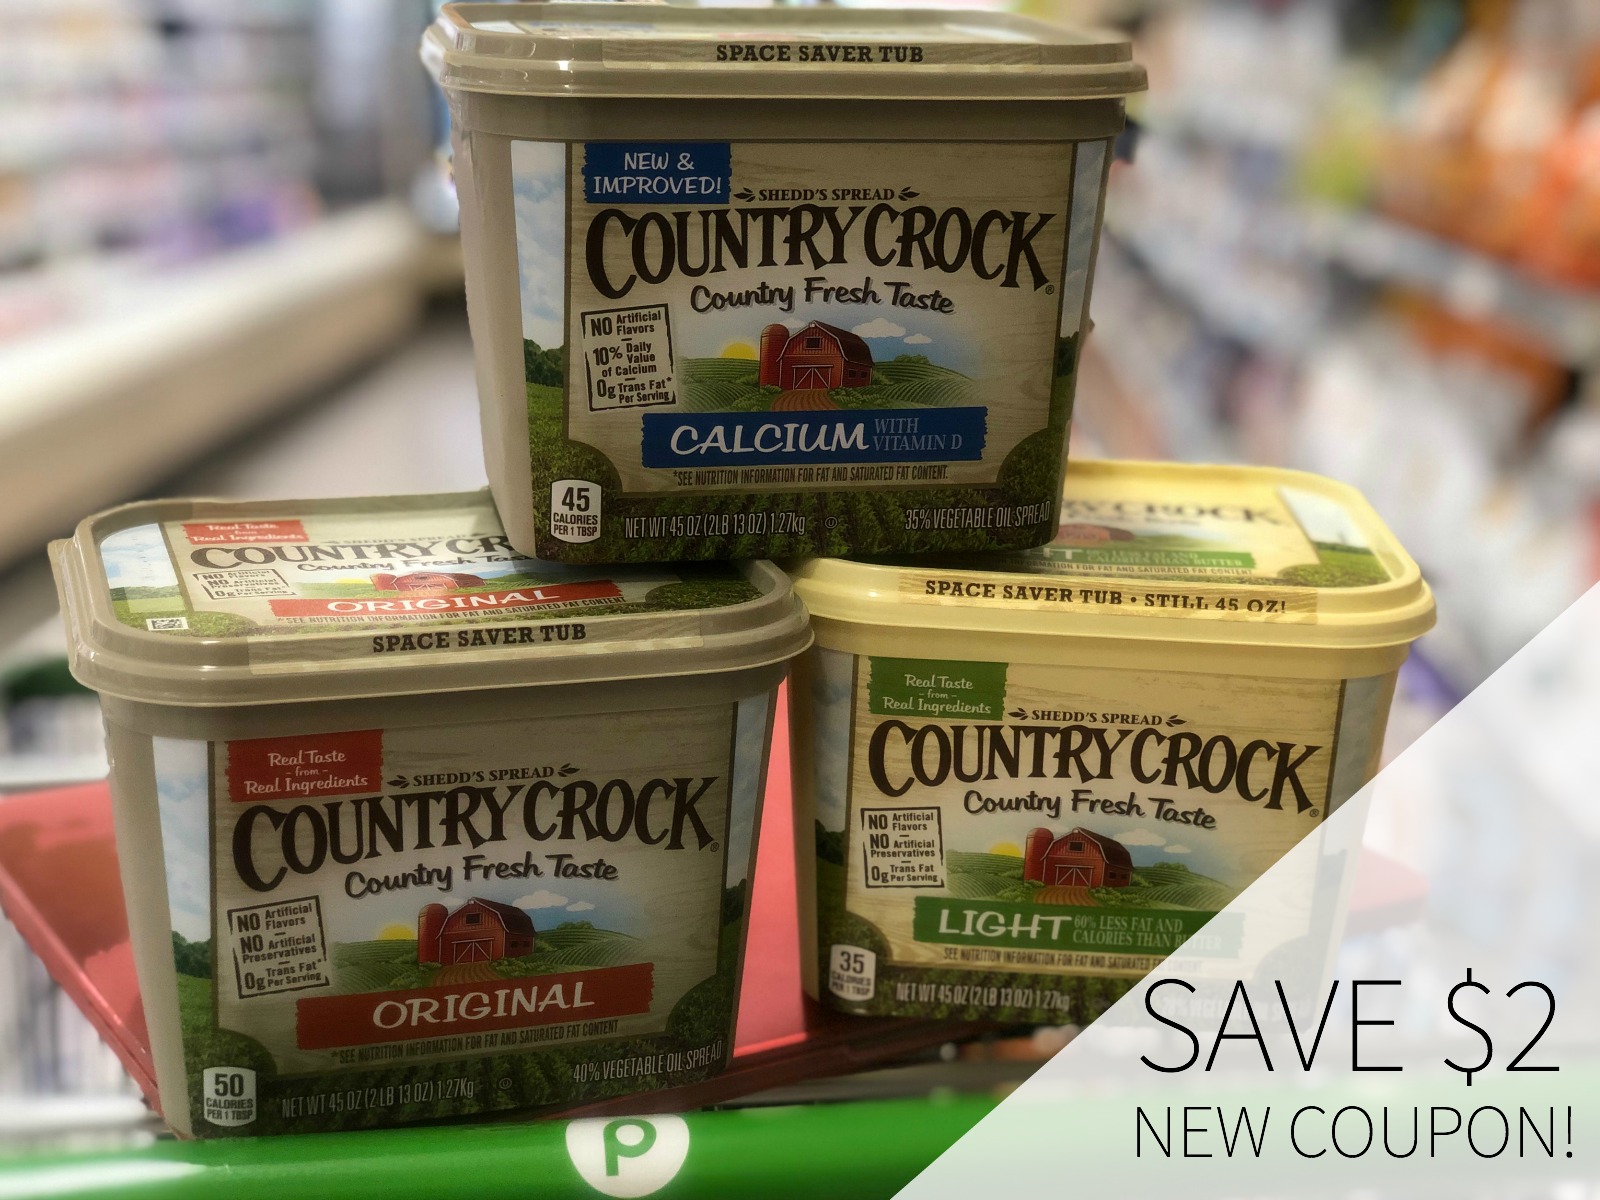 Save $2 On Country Crock With The Digital Coupon on I Heart Publix